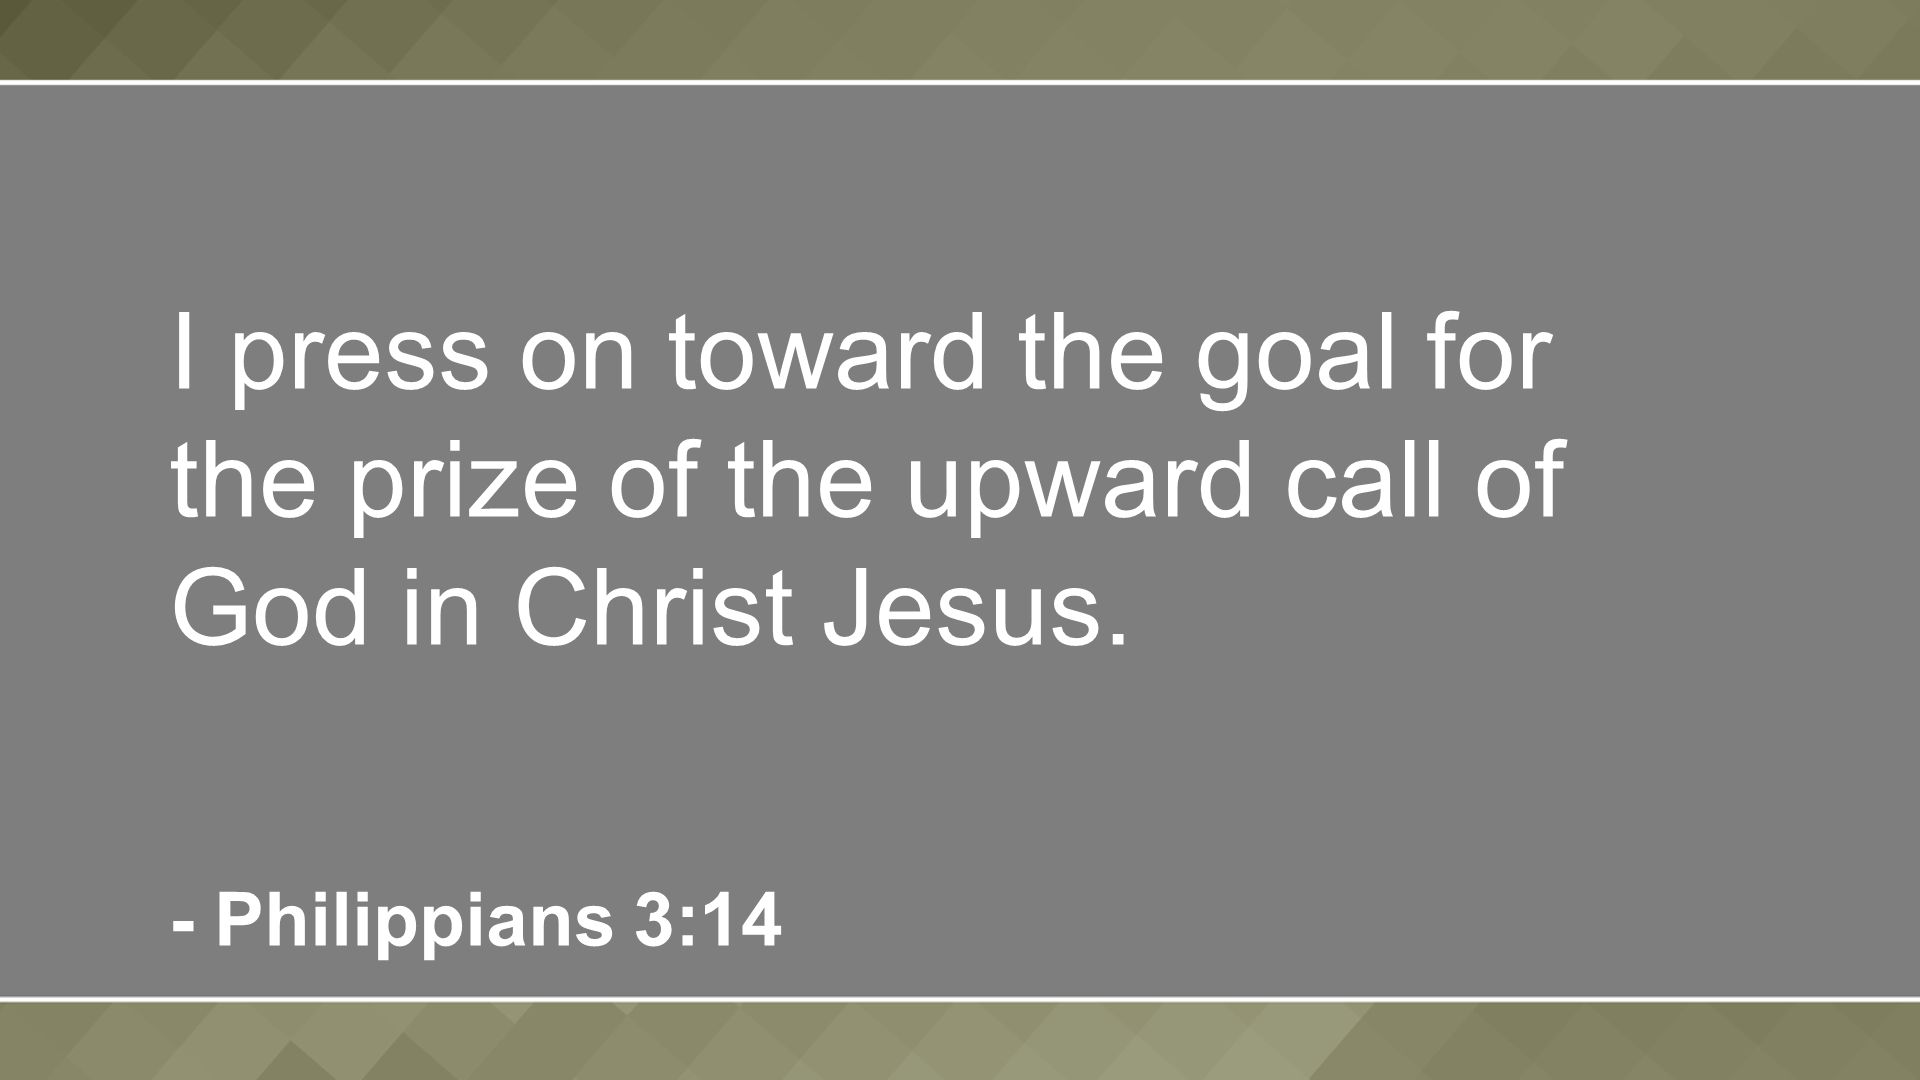 I press on toward the goal for the prize of the upward call of God in Christ Jesus.